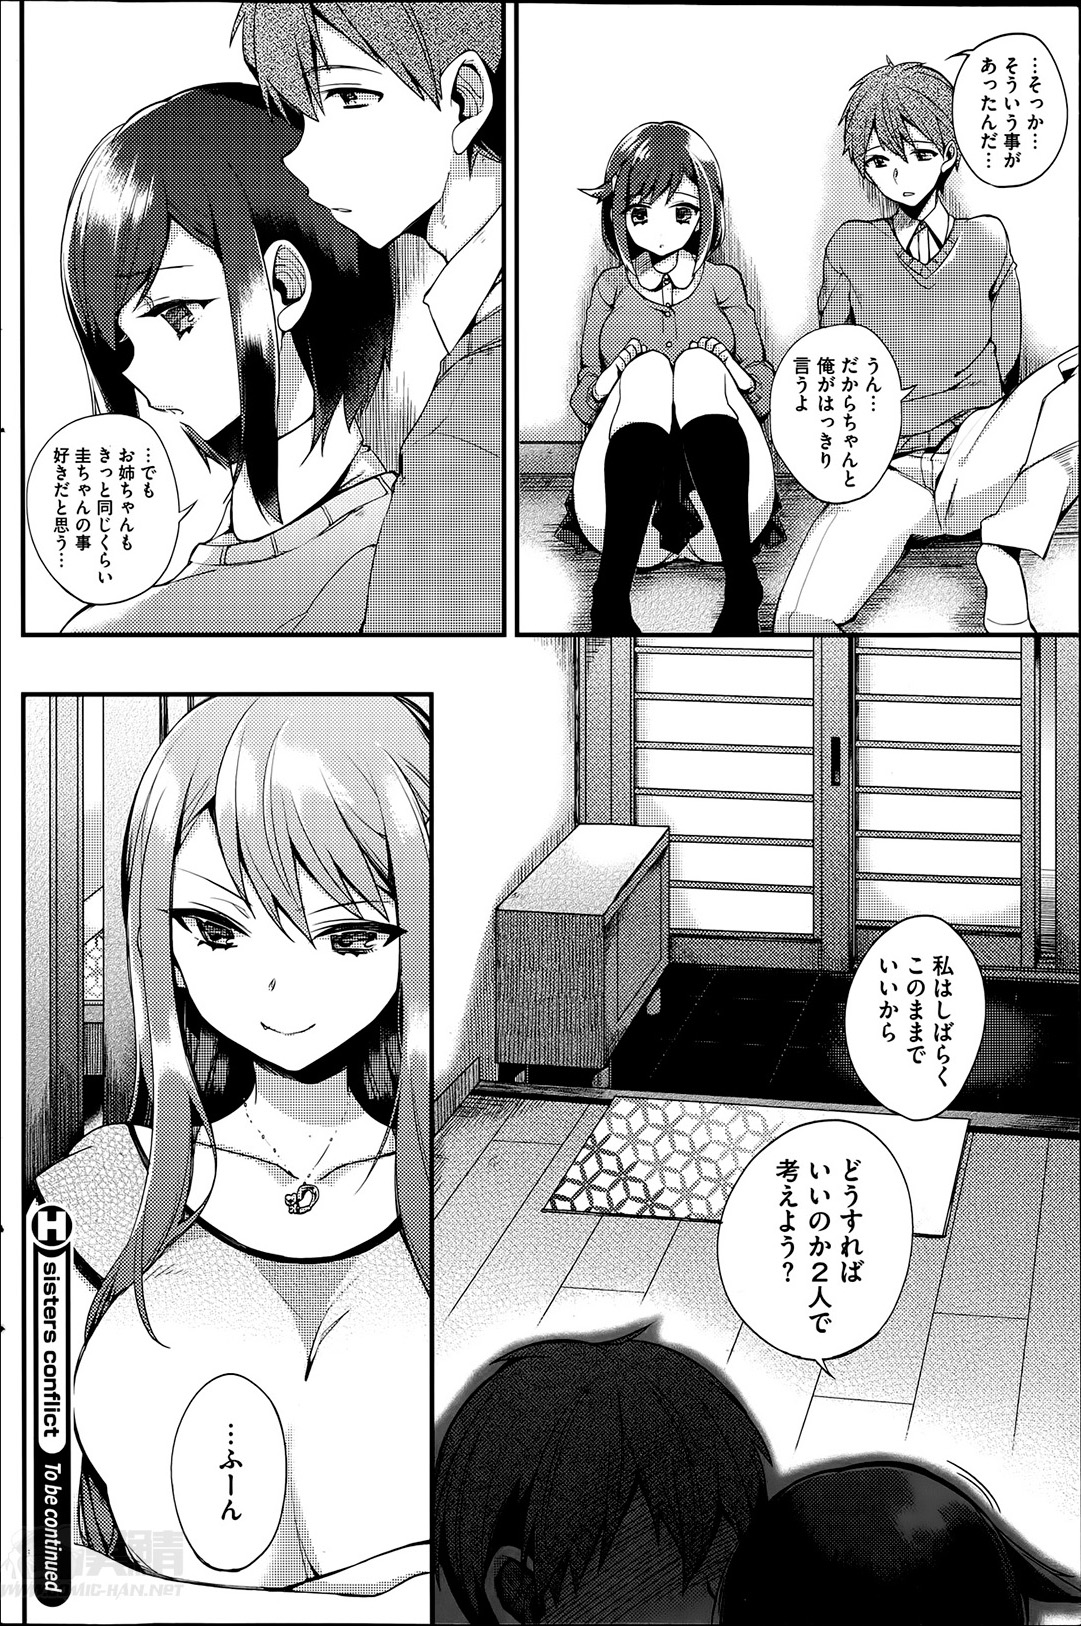 [Shindou] Sisters Conflict Ch.1-2 page 22 full